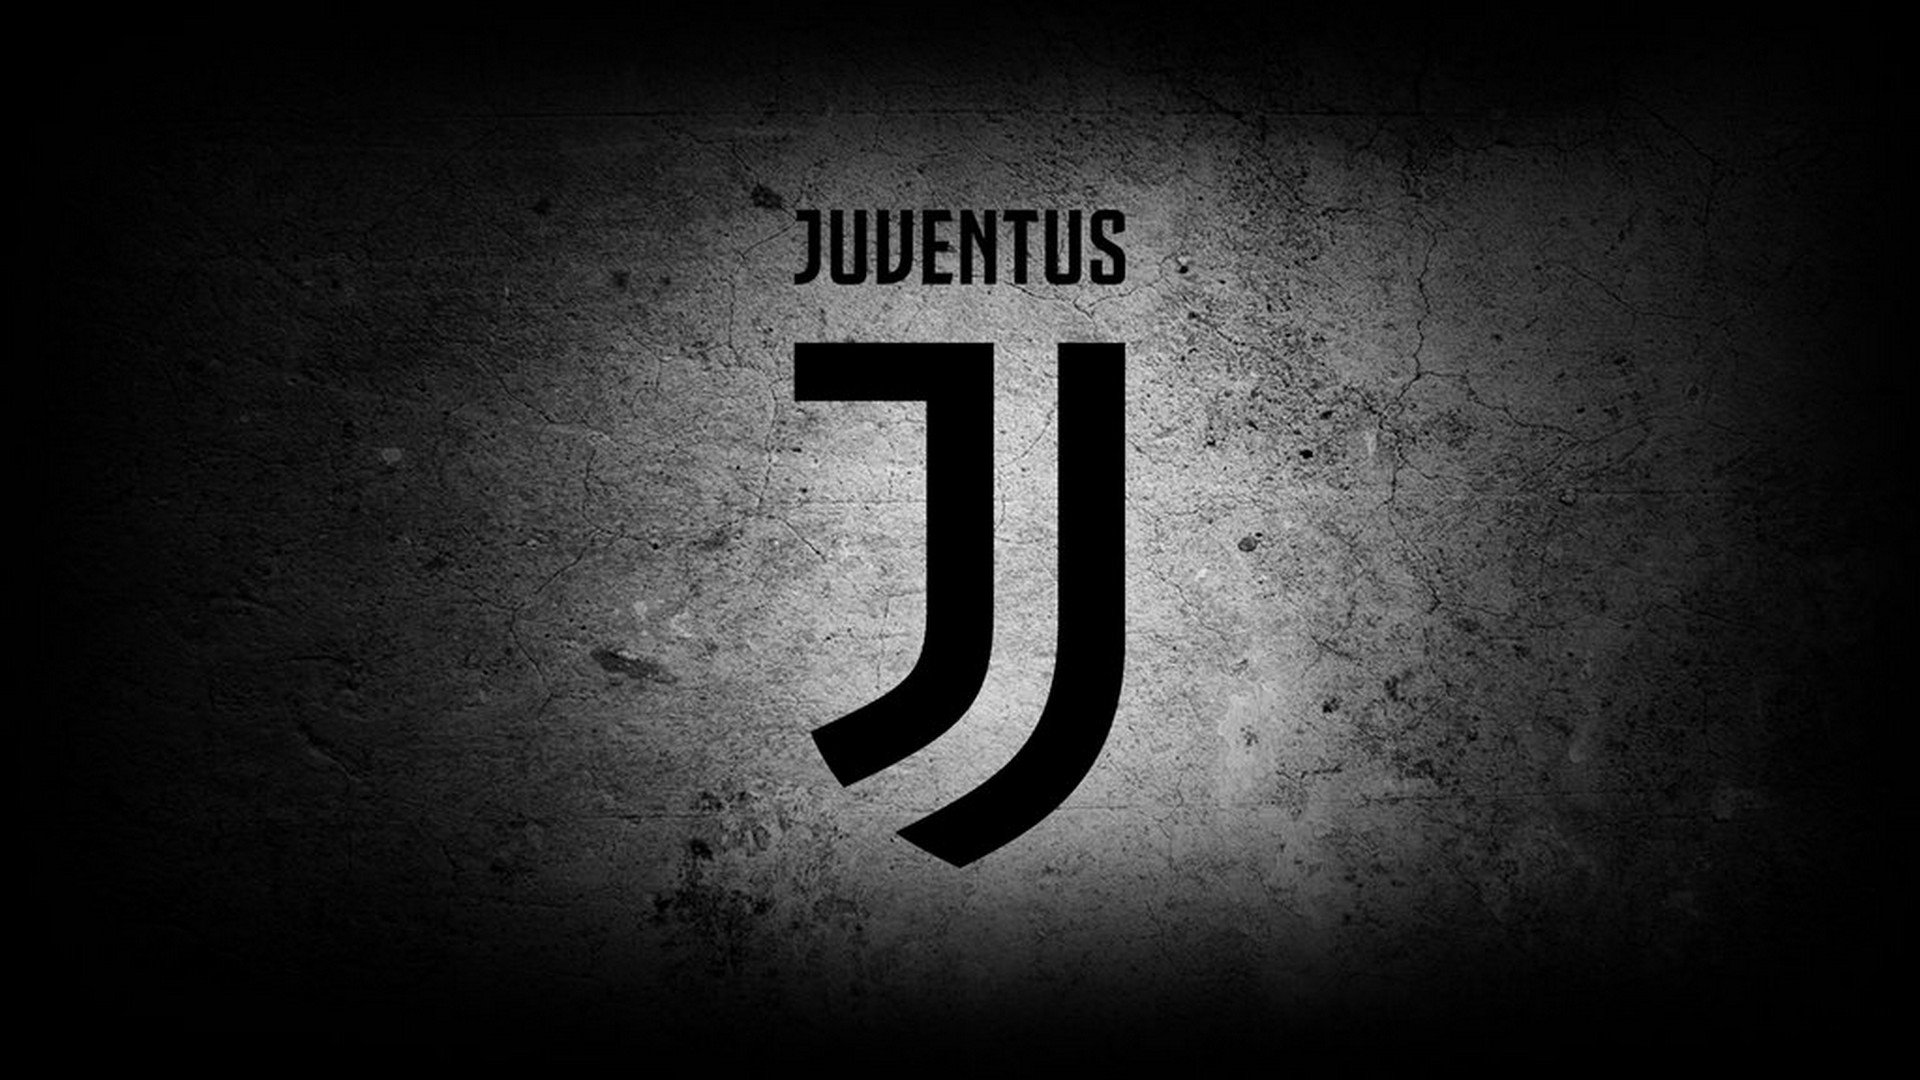 Juventus Wallpaper HD with image resolution 1920x1080 pixel. You can use this wallpaper as background for your desktop Computer Screensavers, Android or iPhone smartphones